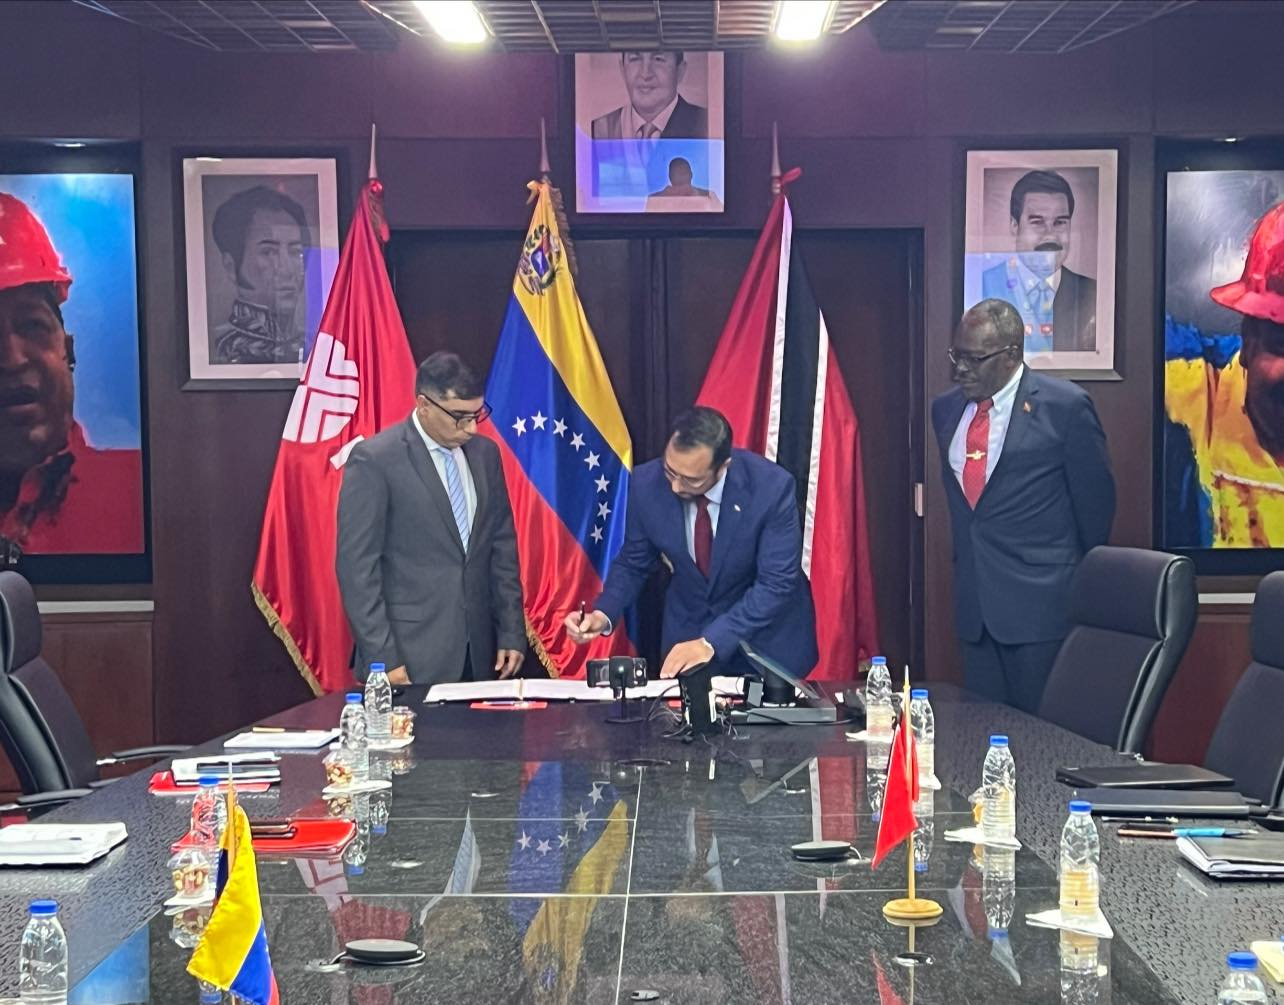 Energy Minister signs NDA with PDVSA